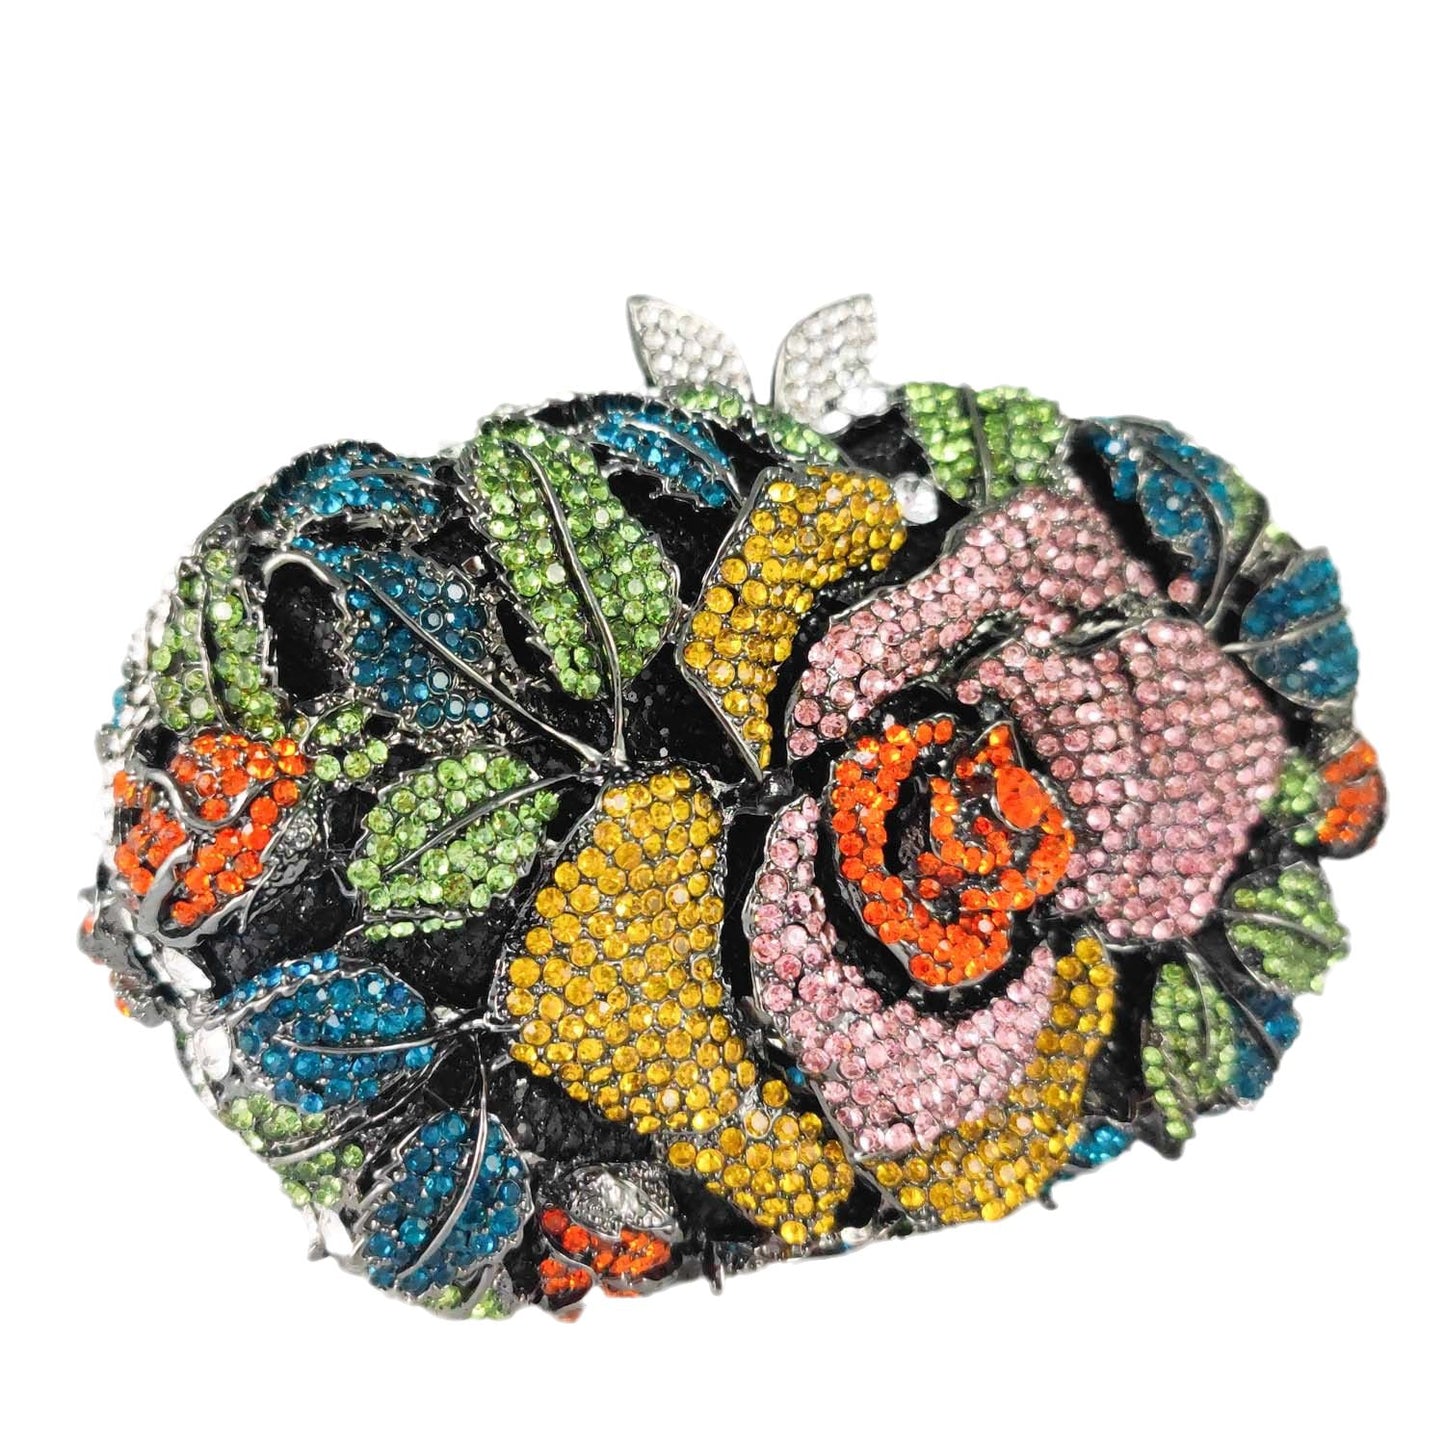 Multicolored Flowers Butterfly Crystal Clutch Evening Bag Wedding Purse 6 / Small Size